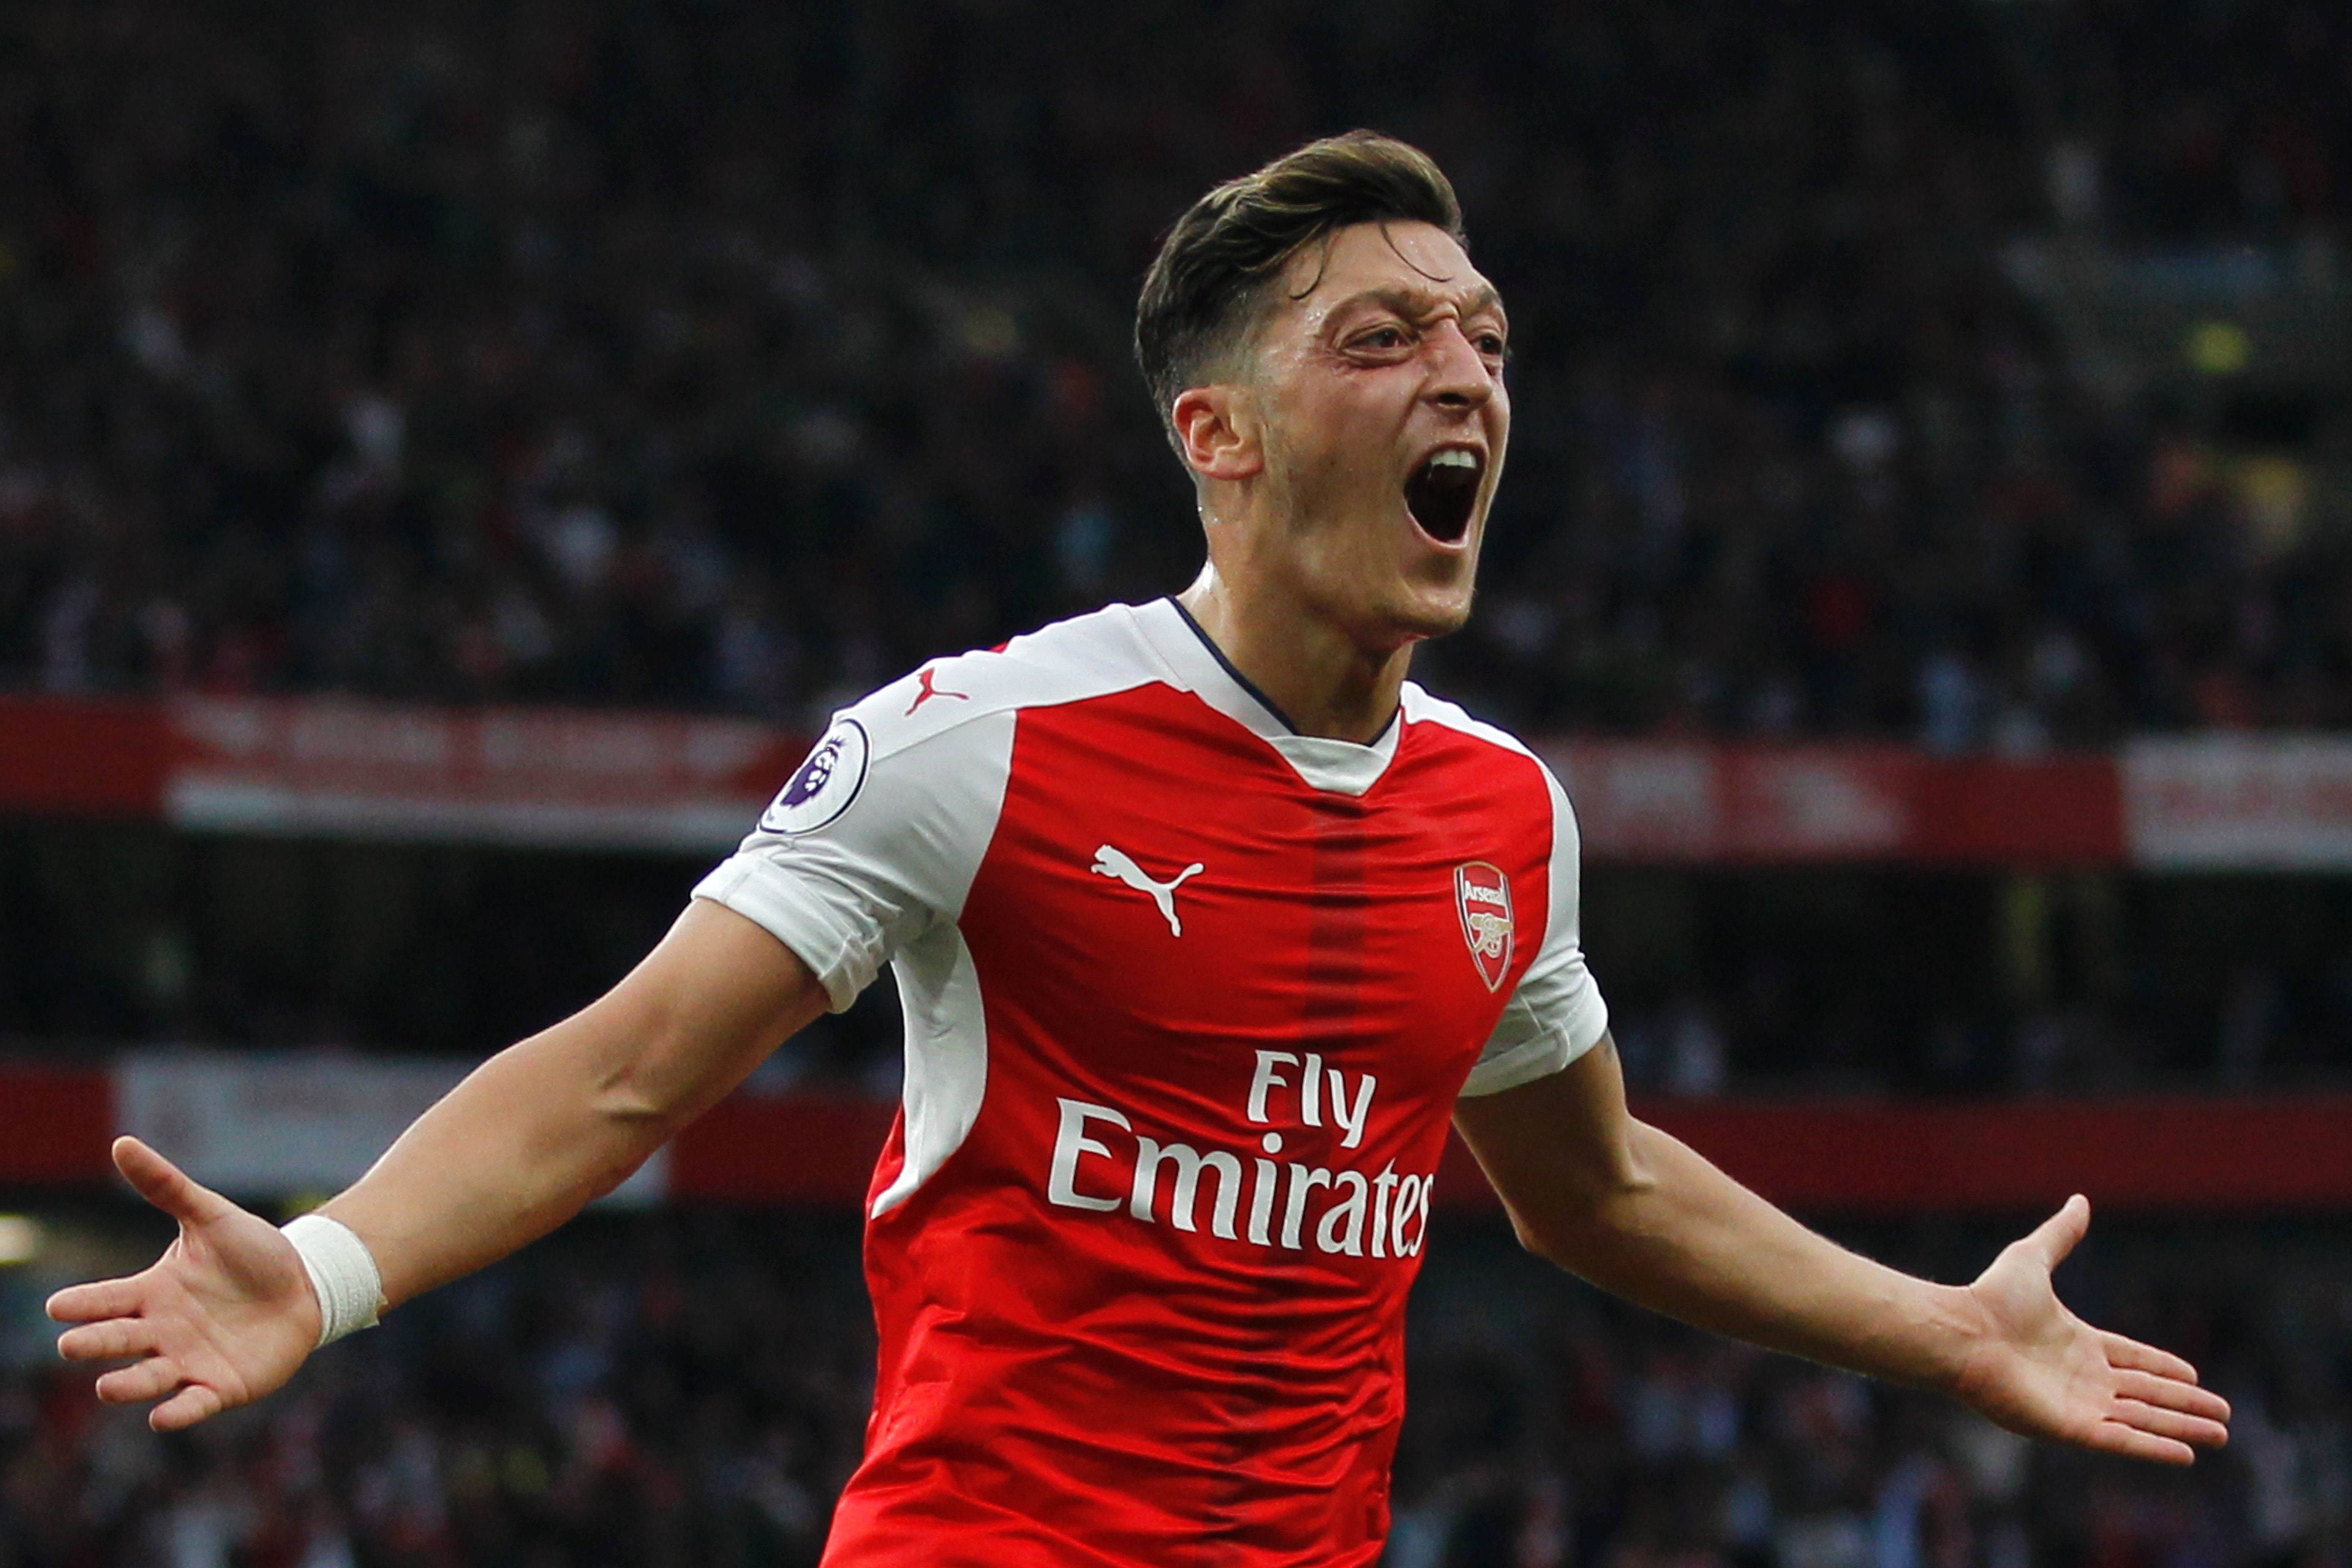 Arsenal's German midfielder Mesut Ozil celebrates scoring their third goal during the English Premier League football match between Arsenal and Chelsea at The Emirates stadium in London, on September 24, 2016. (Photo credit: Ian Kington/AFP/Getty Images)